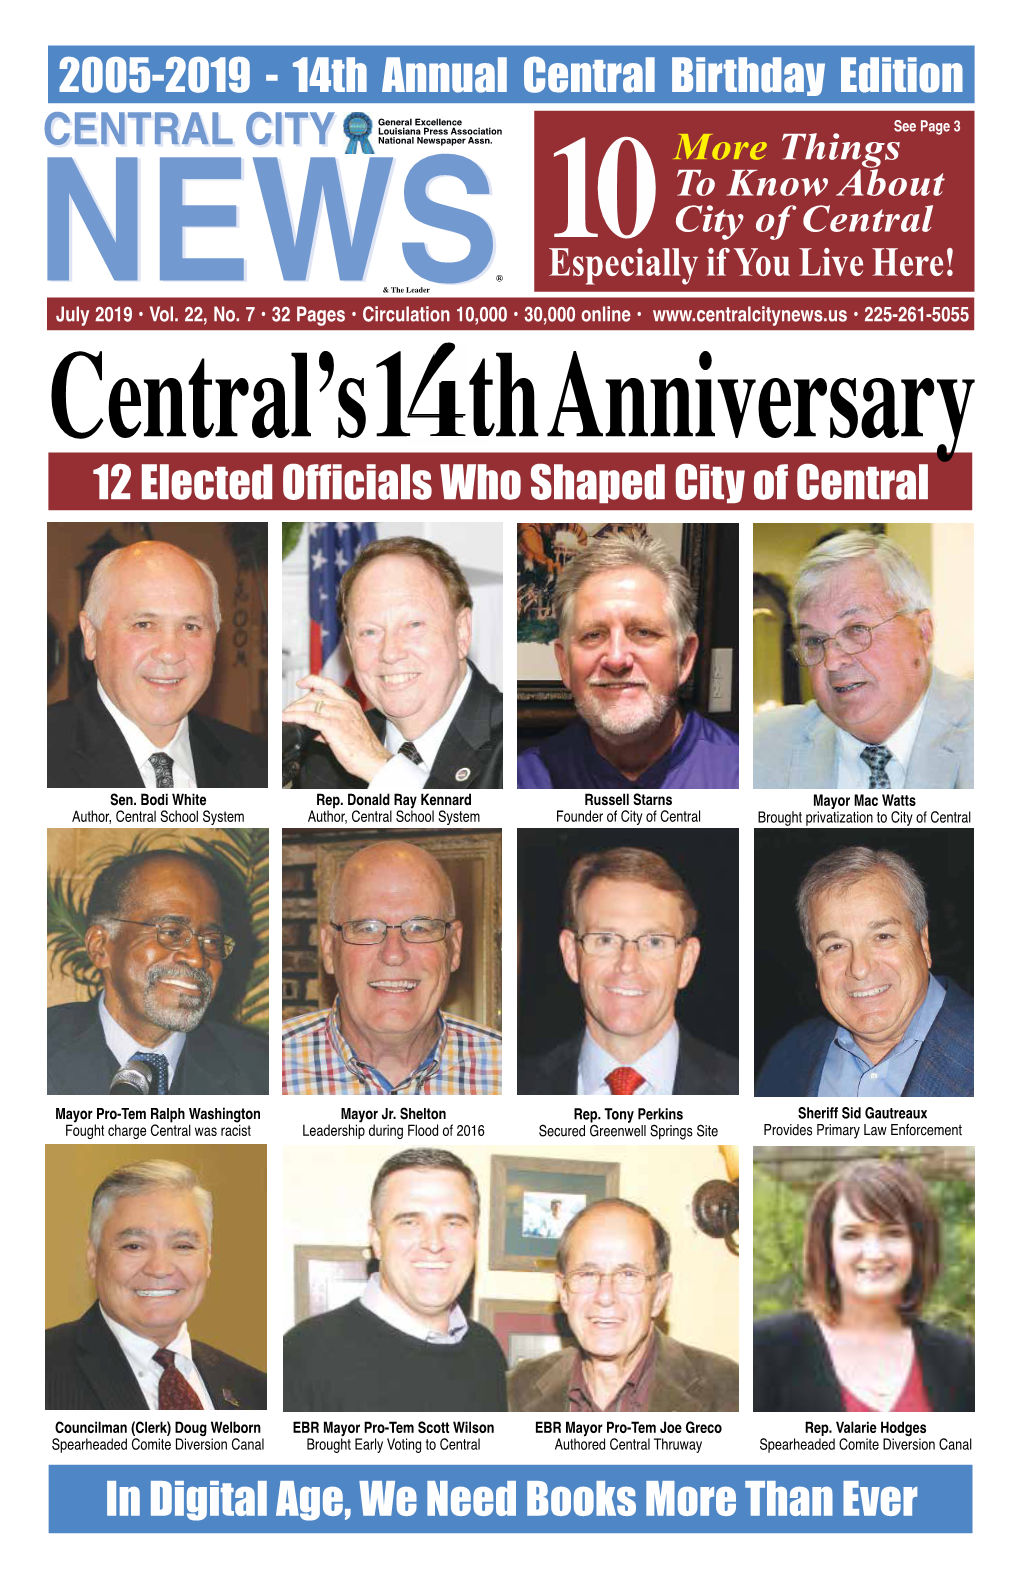 12 Elected Officials Who Shaped City of Central 2005